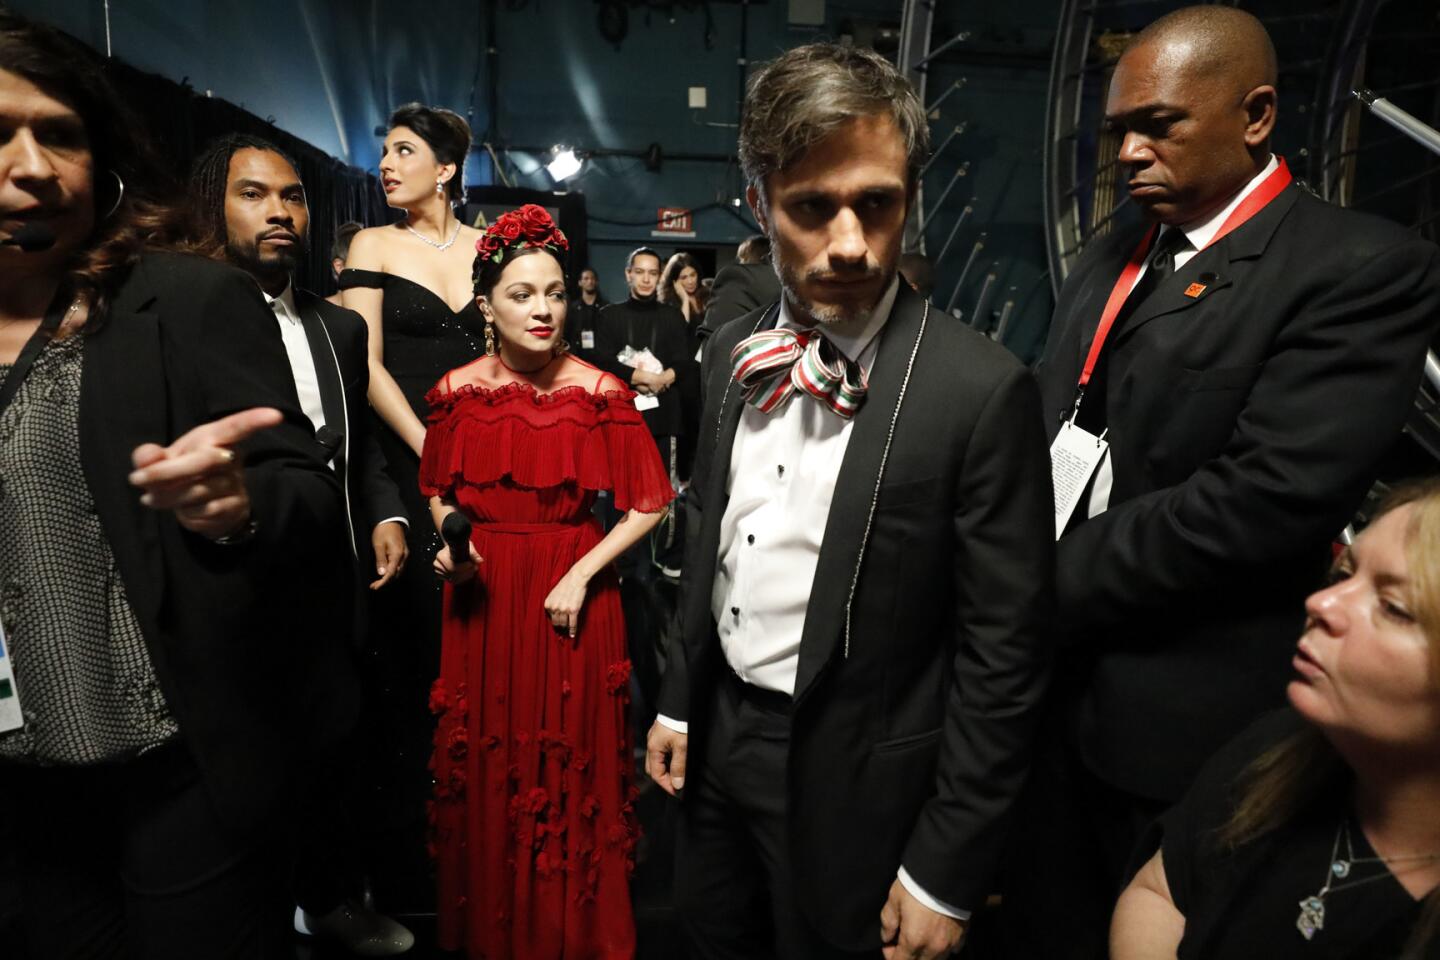 Gael Garcia Bernal backstage at the 90th Academy Awards on Sunday at the Dolby Theatre.